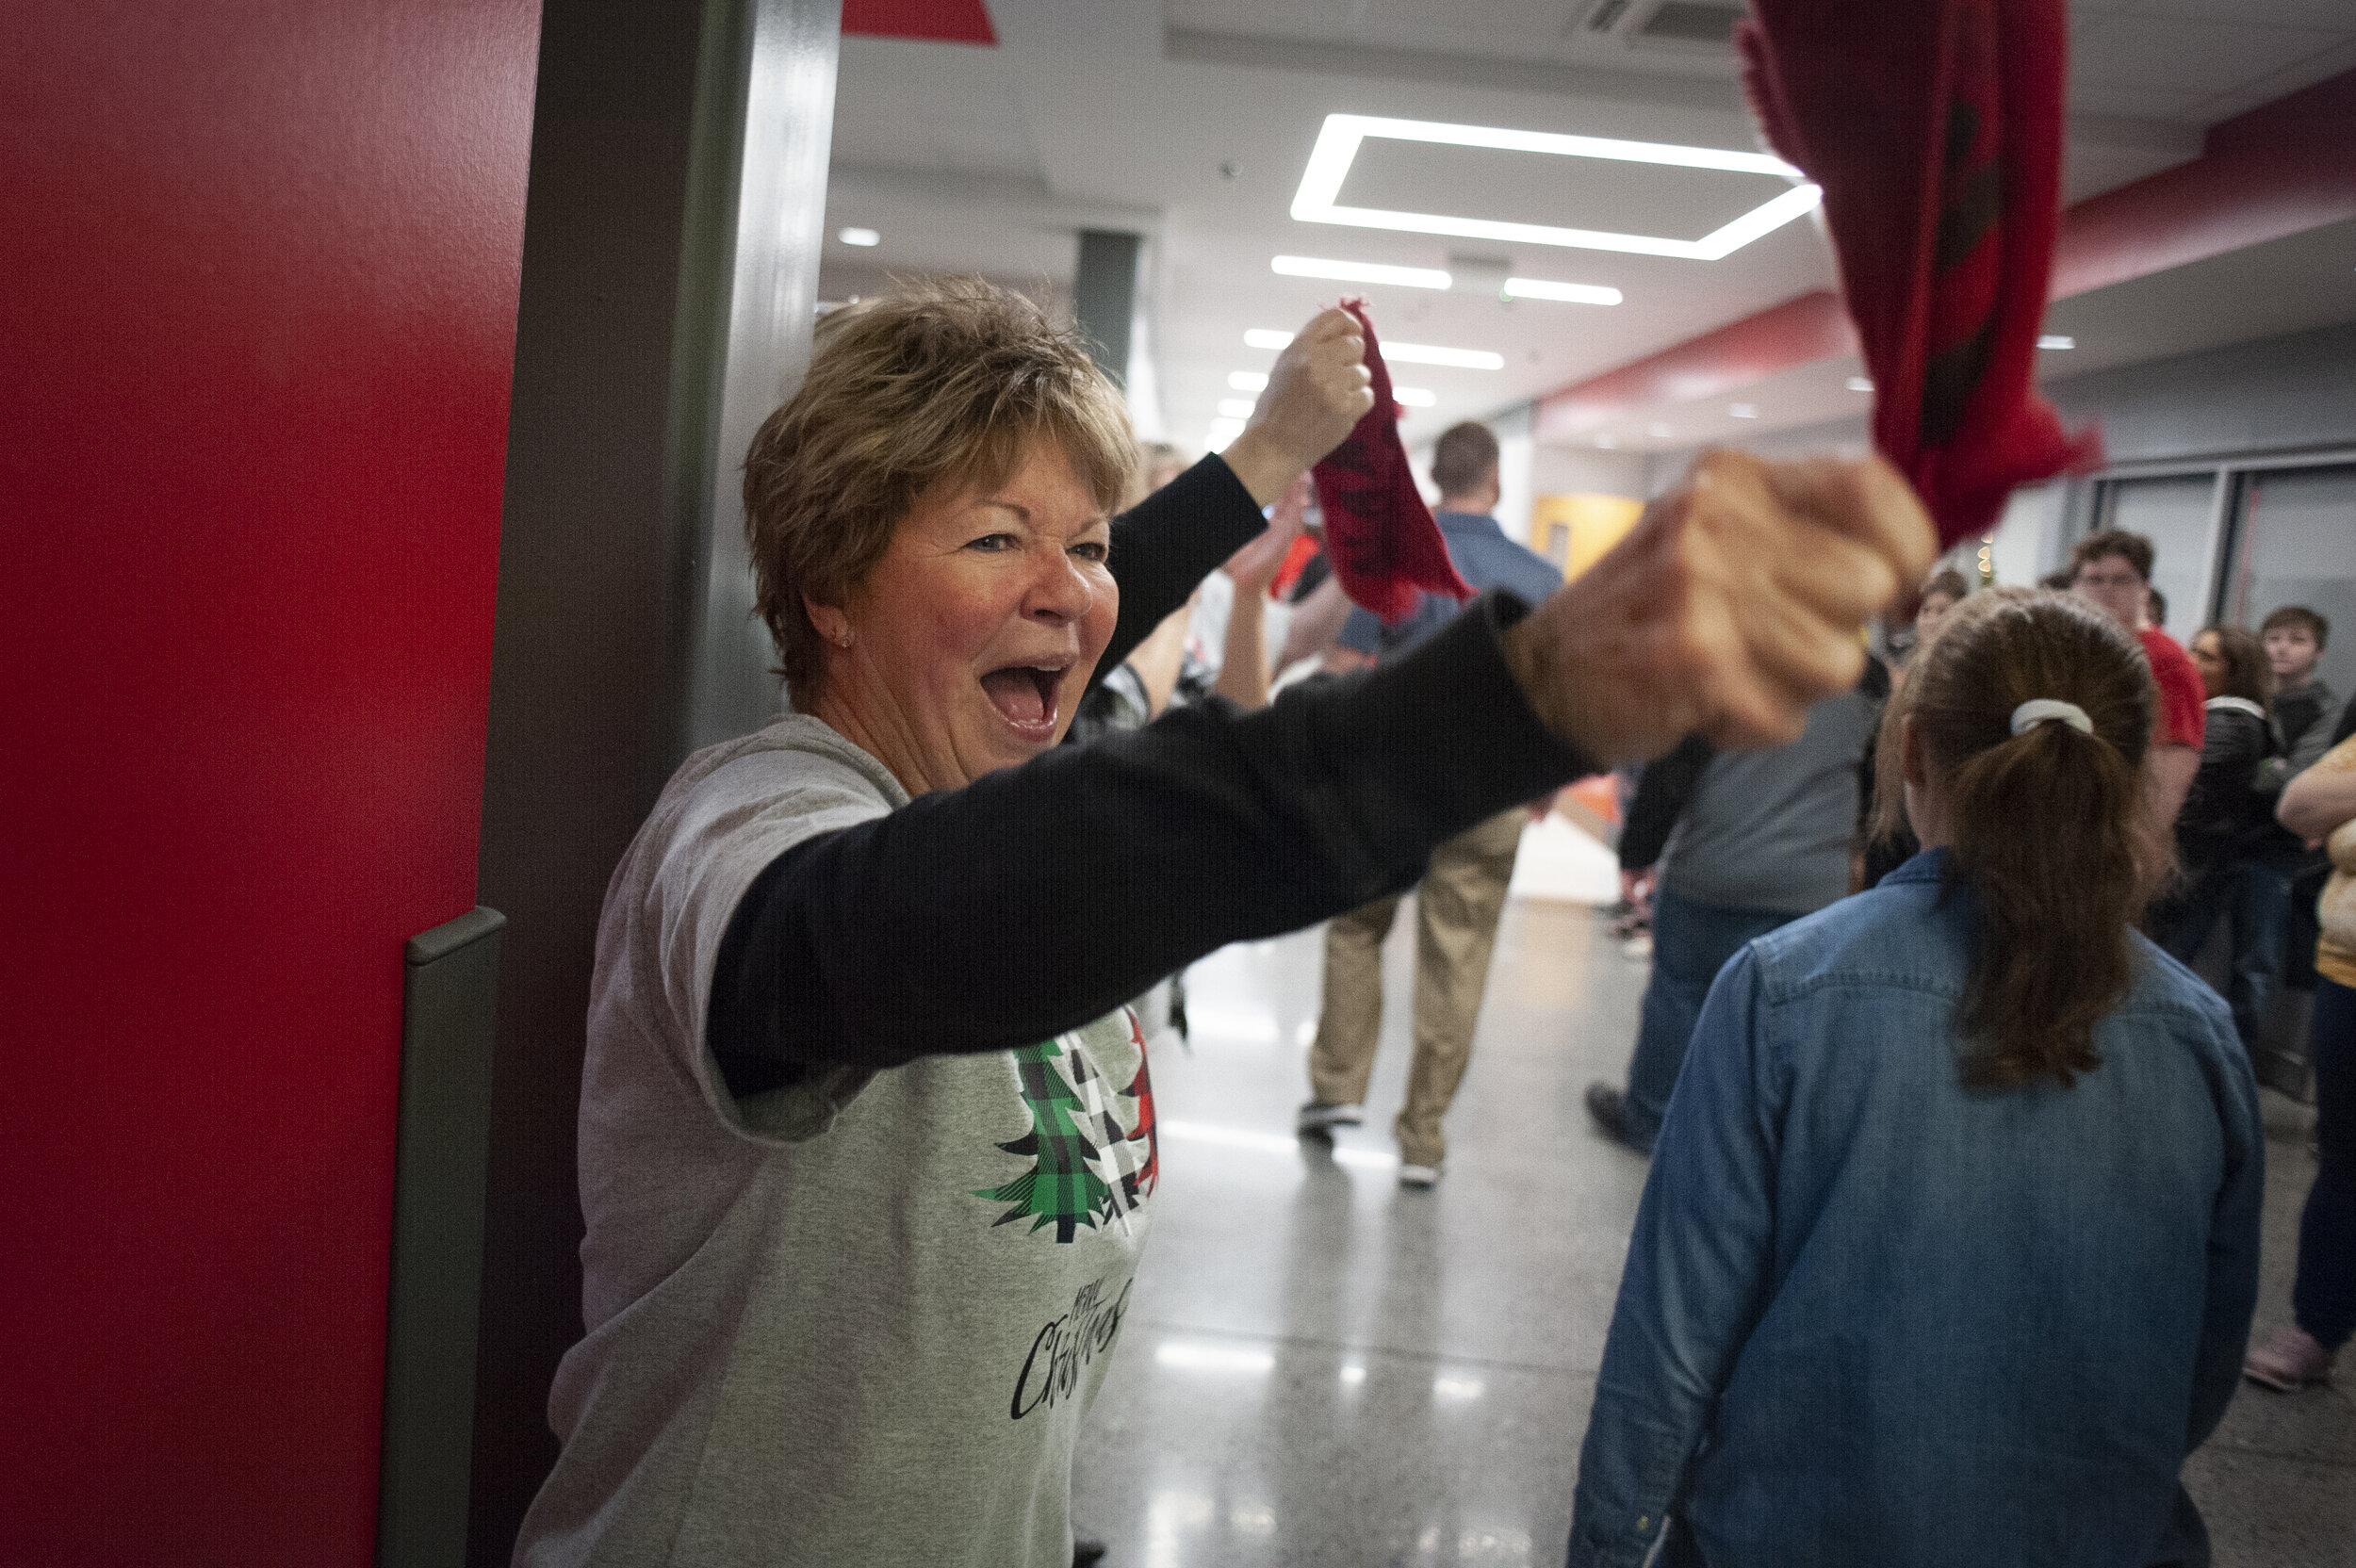  Sharon Sink cheers as Jackson football players take part in a procession through Jackson High School shortly before departing for the Class 5 state championship Friday, Dec. 6, 2019, in Jackson.  